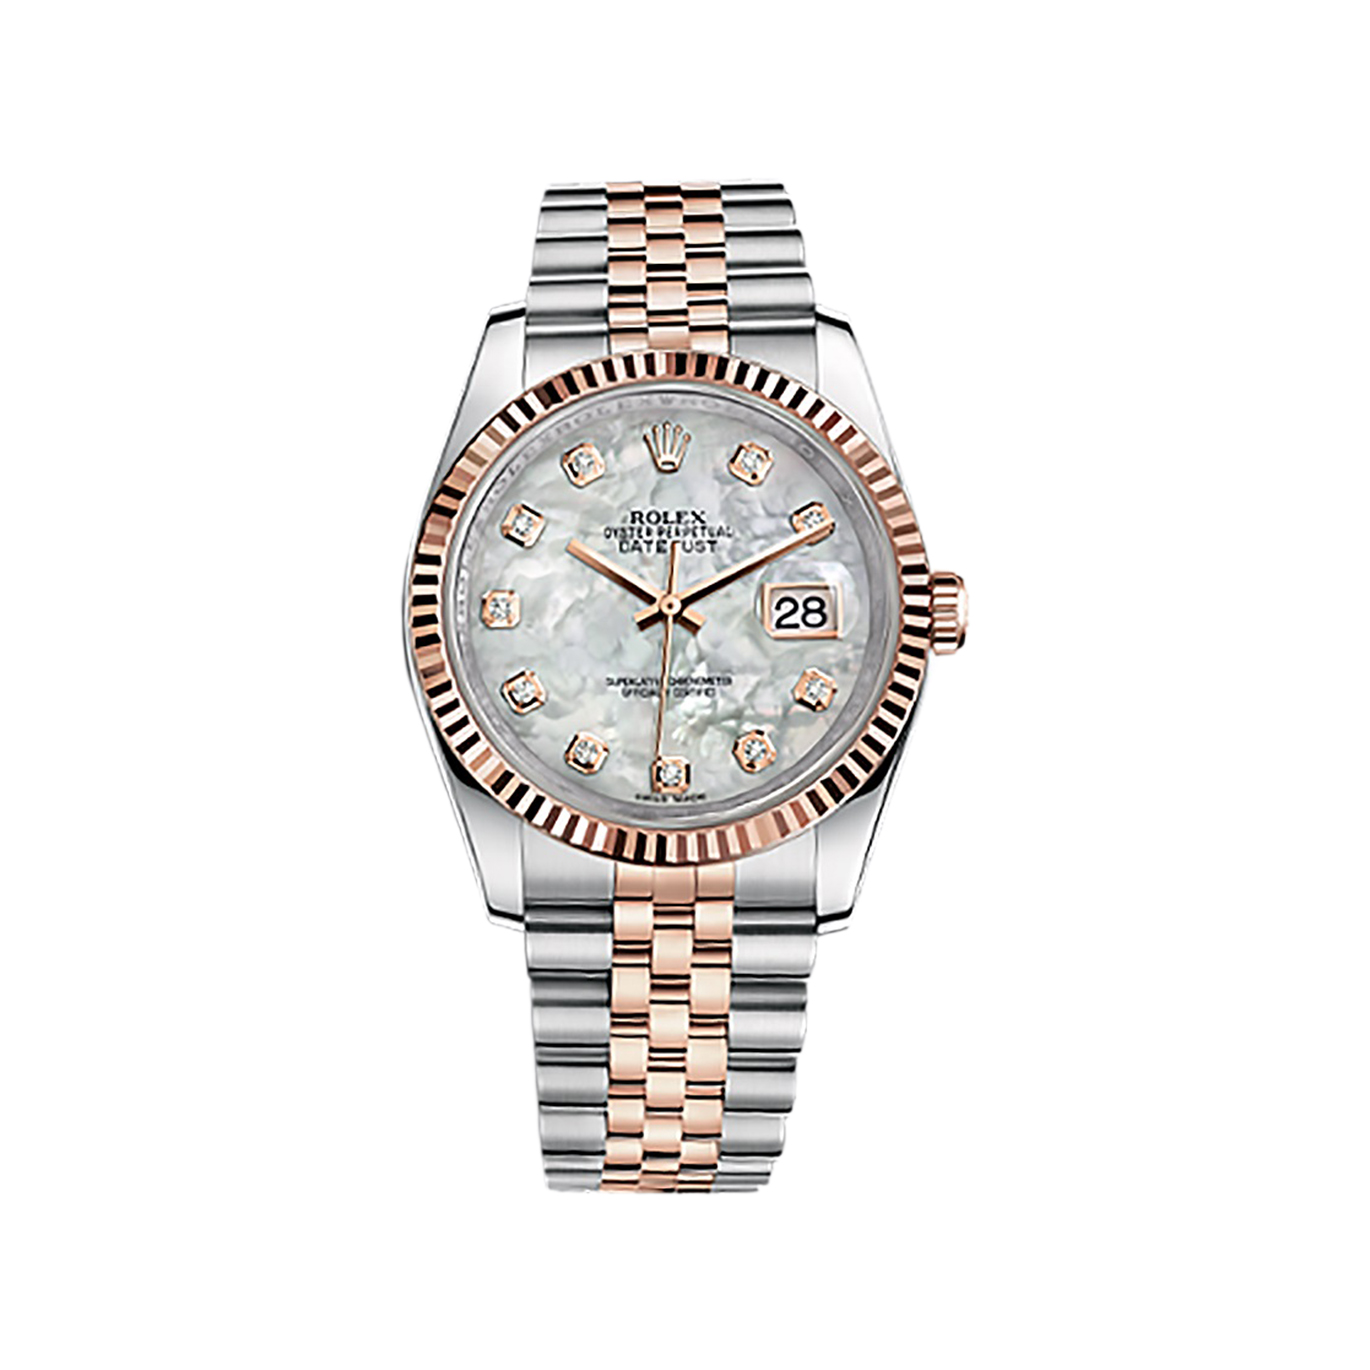 Datejust 36 116231 Rose Gold & Stainless Steel Watch (White Mother-of-Pearl Set with Diamonds)